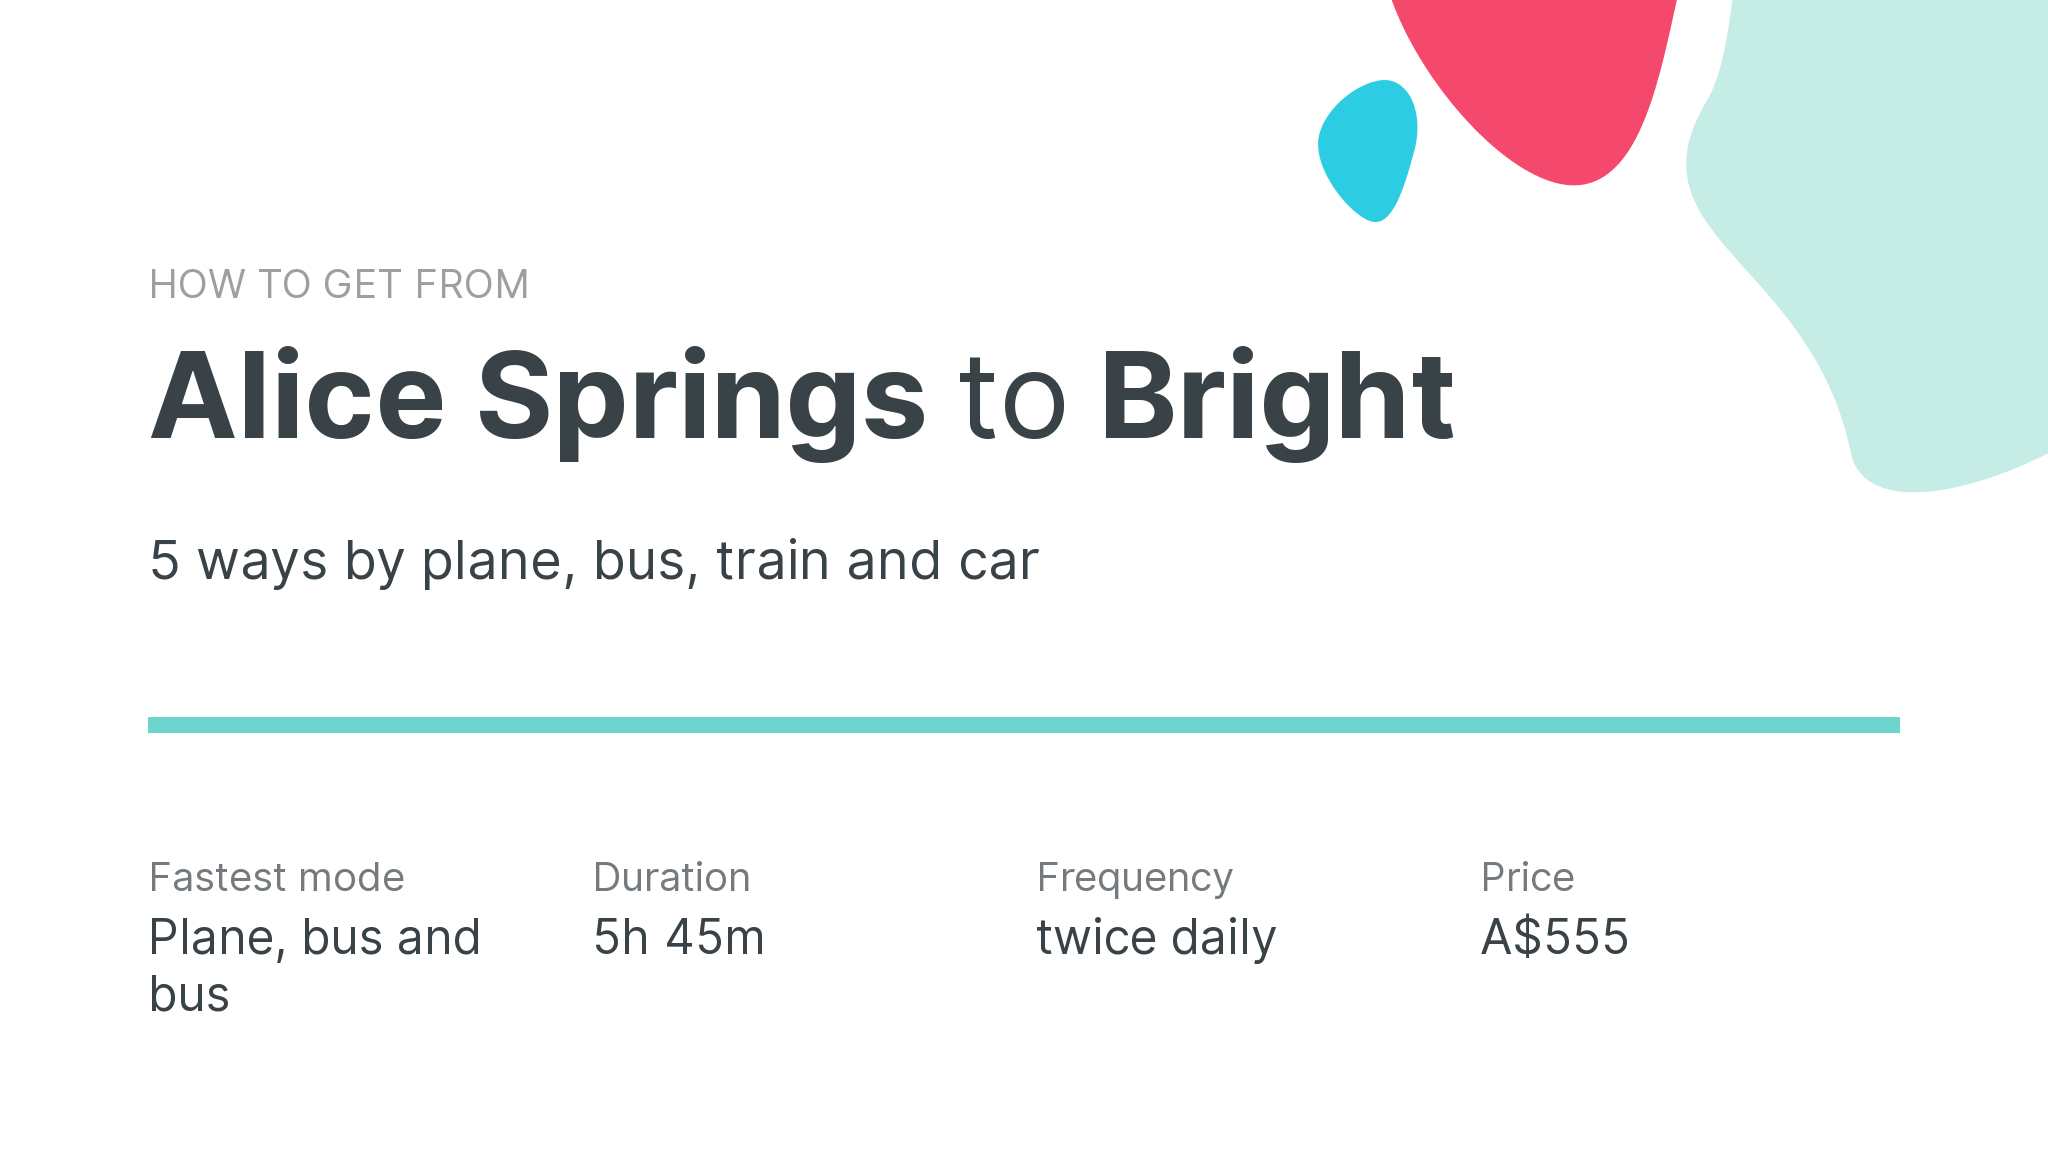 How do I get from Alice Springs to Bright